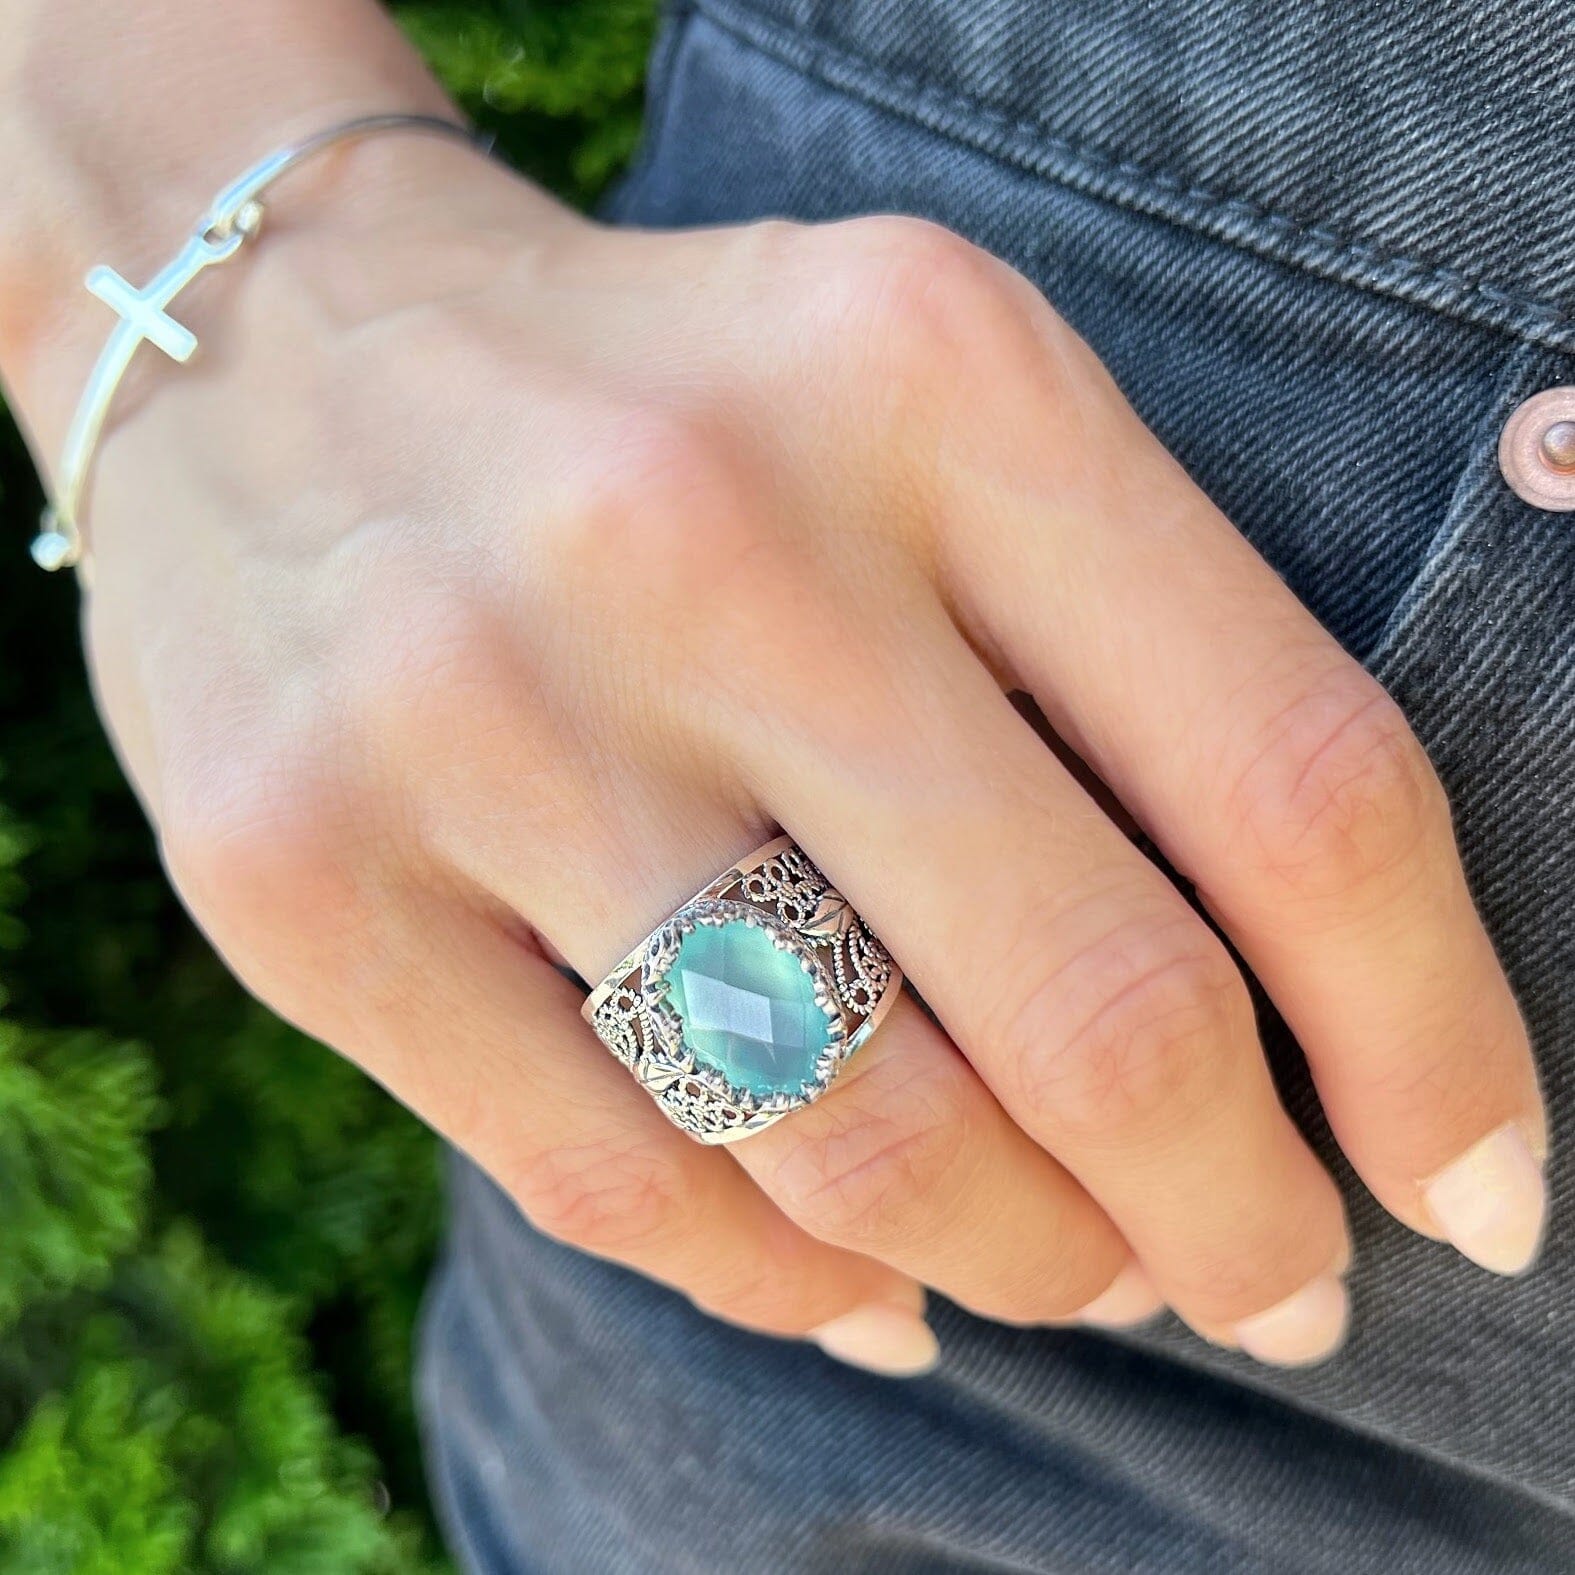 Oasis Ring paired with I'm His Bracelet